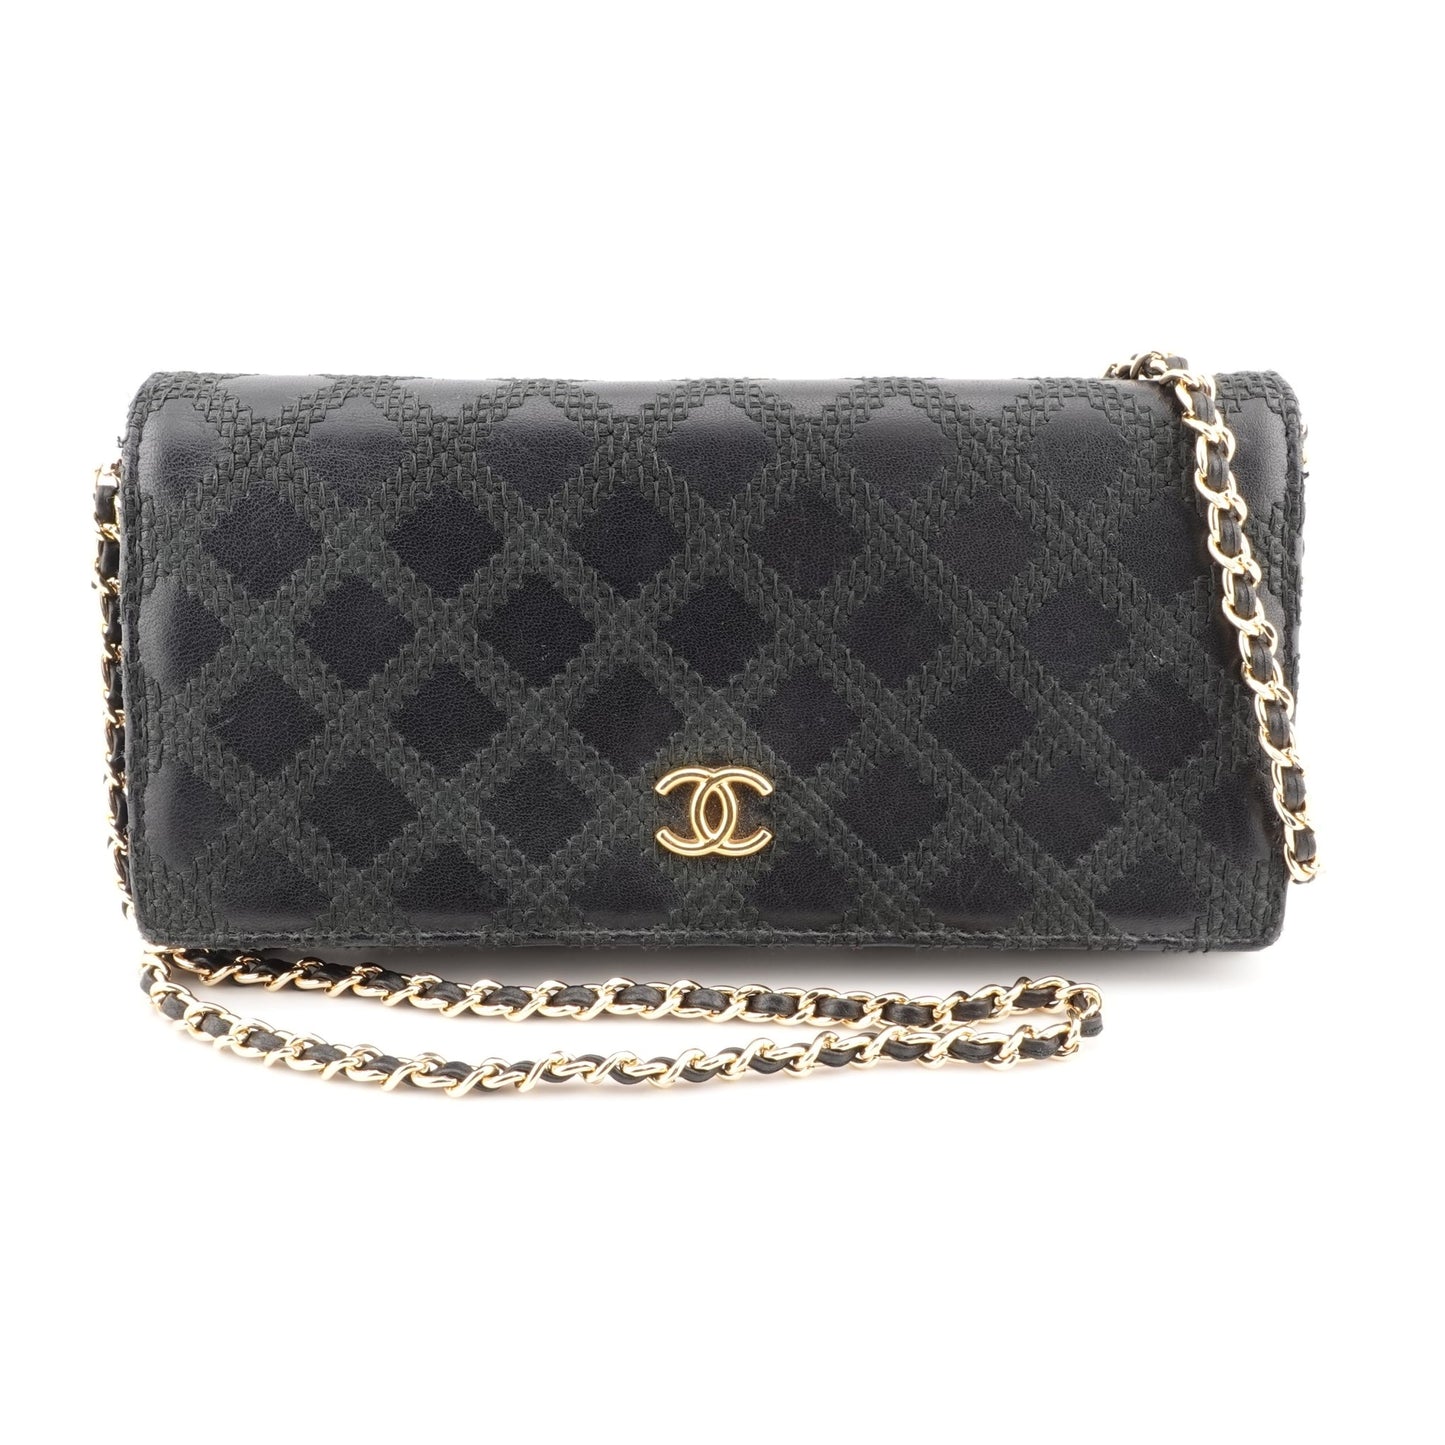 CHANEL Lambskin Ultra Stitch Quilted Full Flap Wallet with Chain - Bag Envy